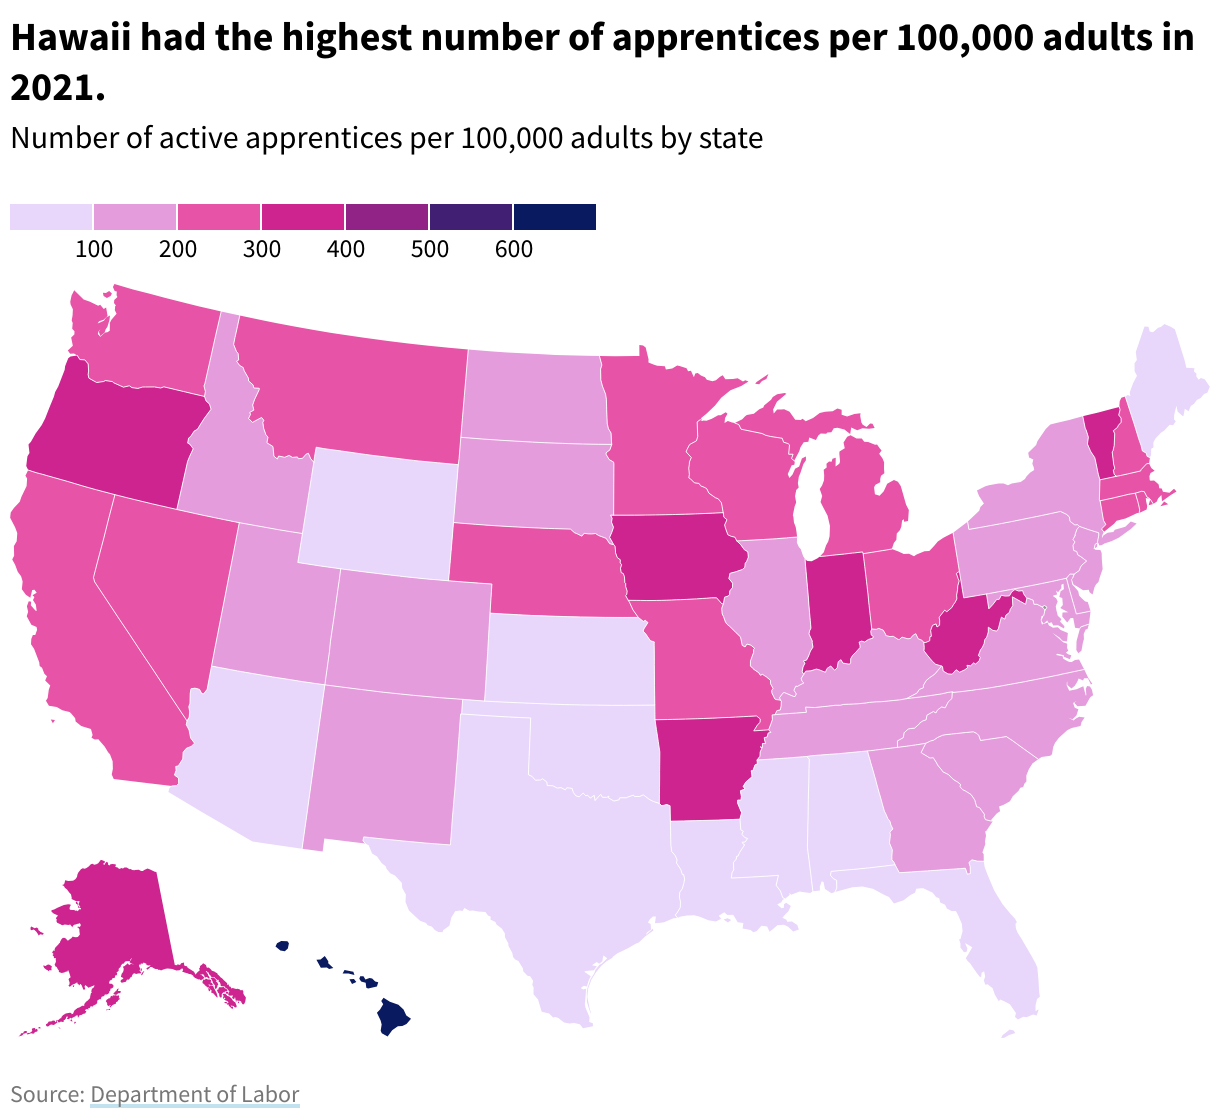 Map of the US showing apprenticeships per 100,000 people. Hawaii is darkest by a wide margin with the most apprenticeships at 1195.7 per 100K people, followed by Indiana, West Virginia, and Alaska around 350 per 100K people. Oklahoma is lightest.